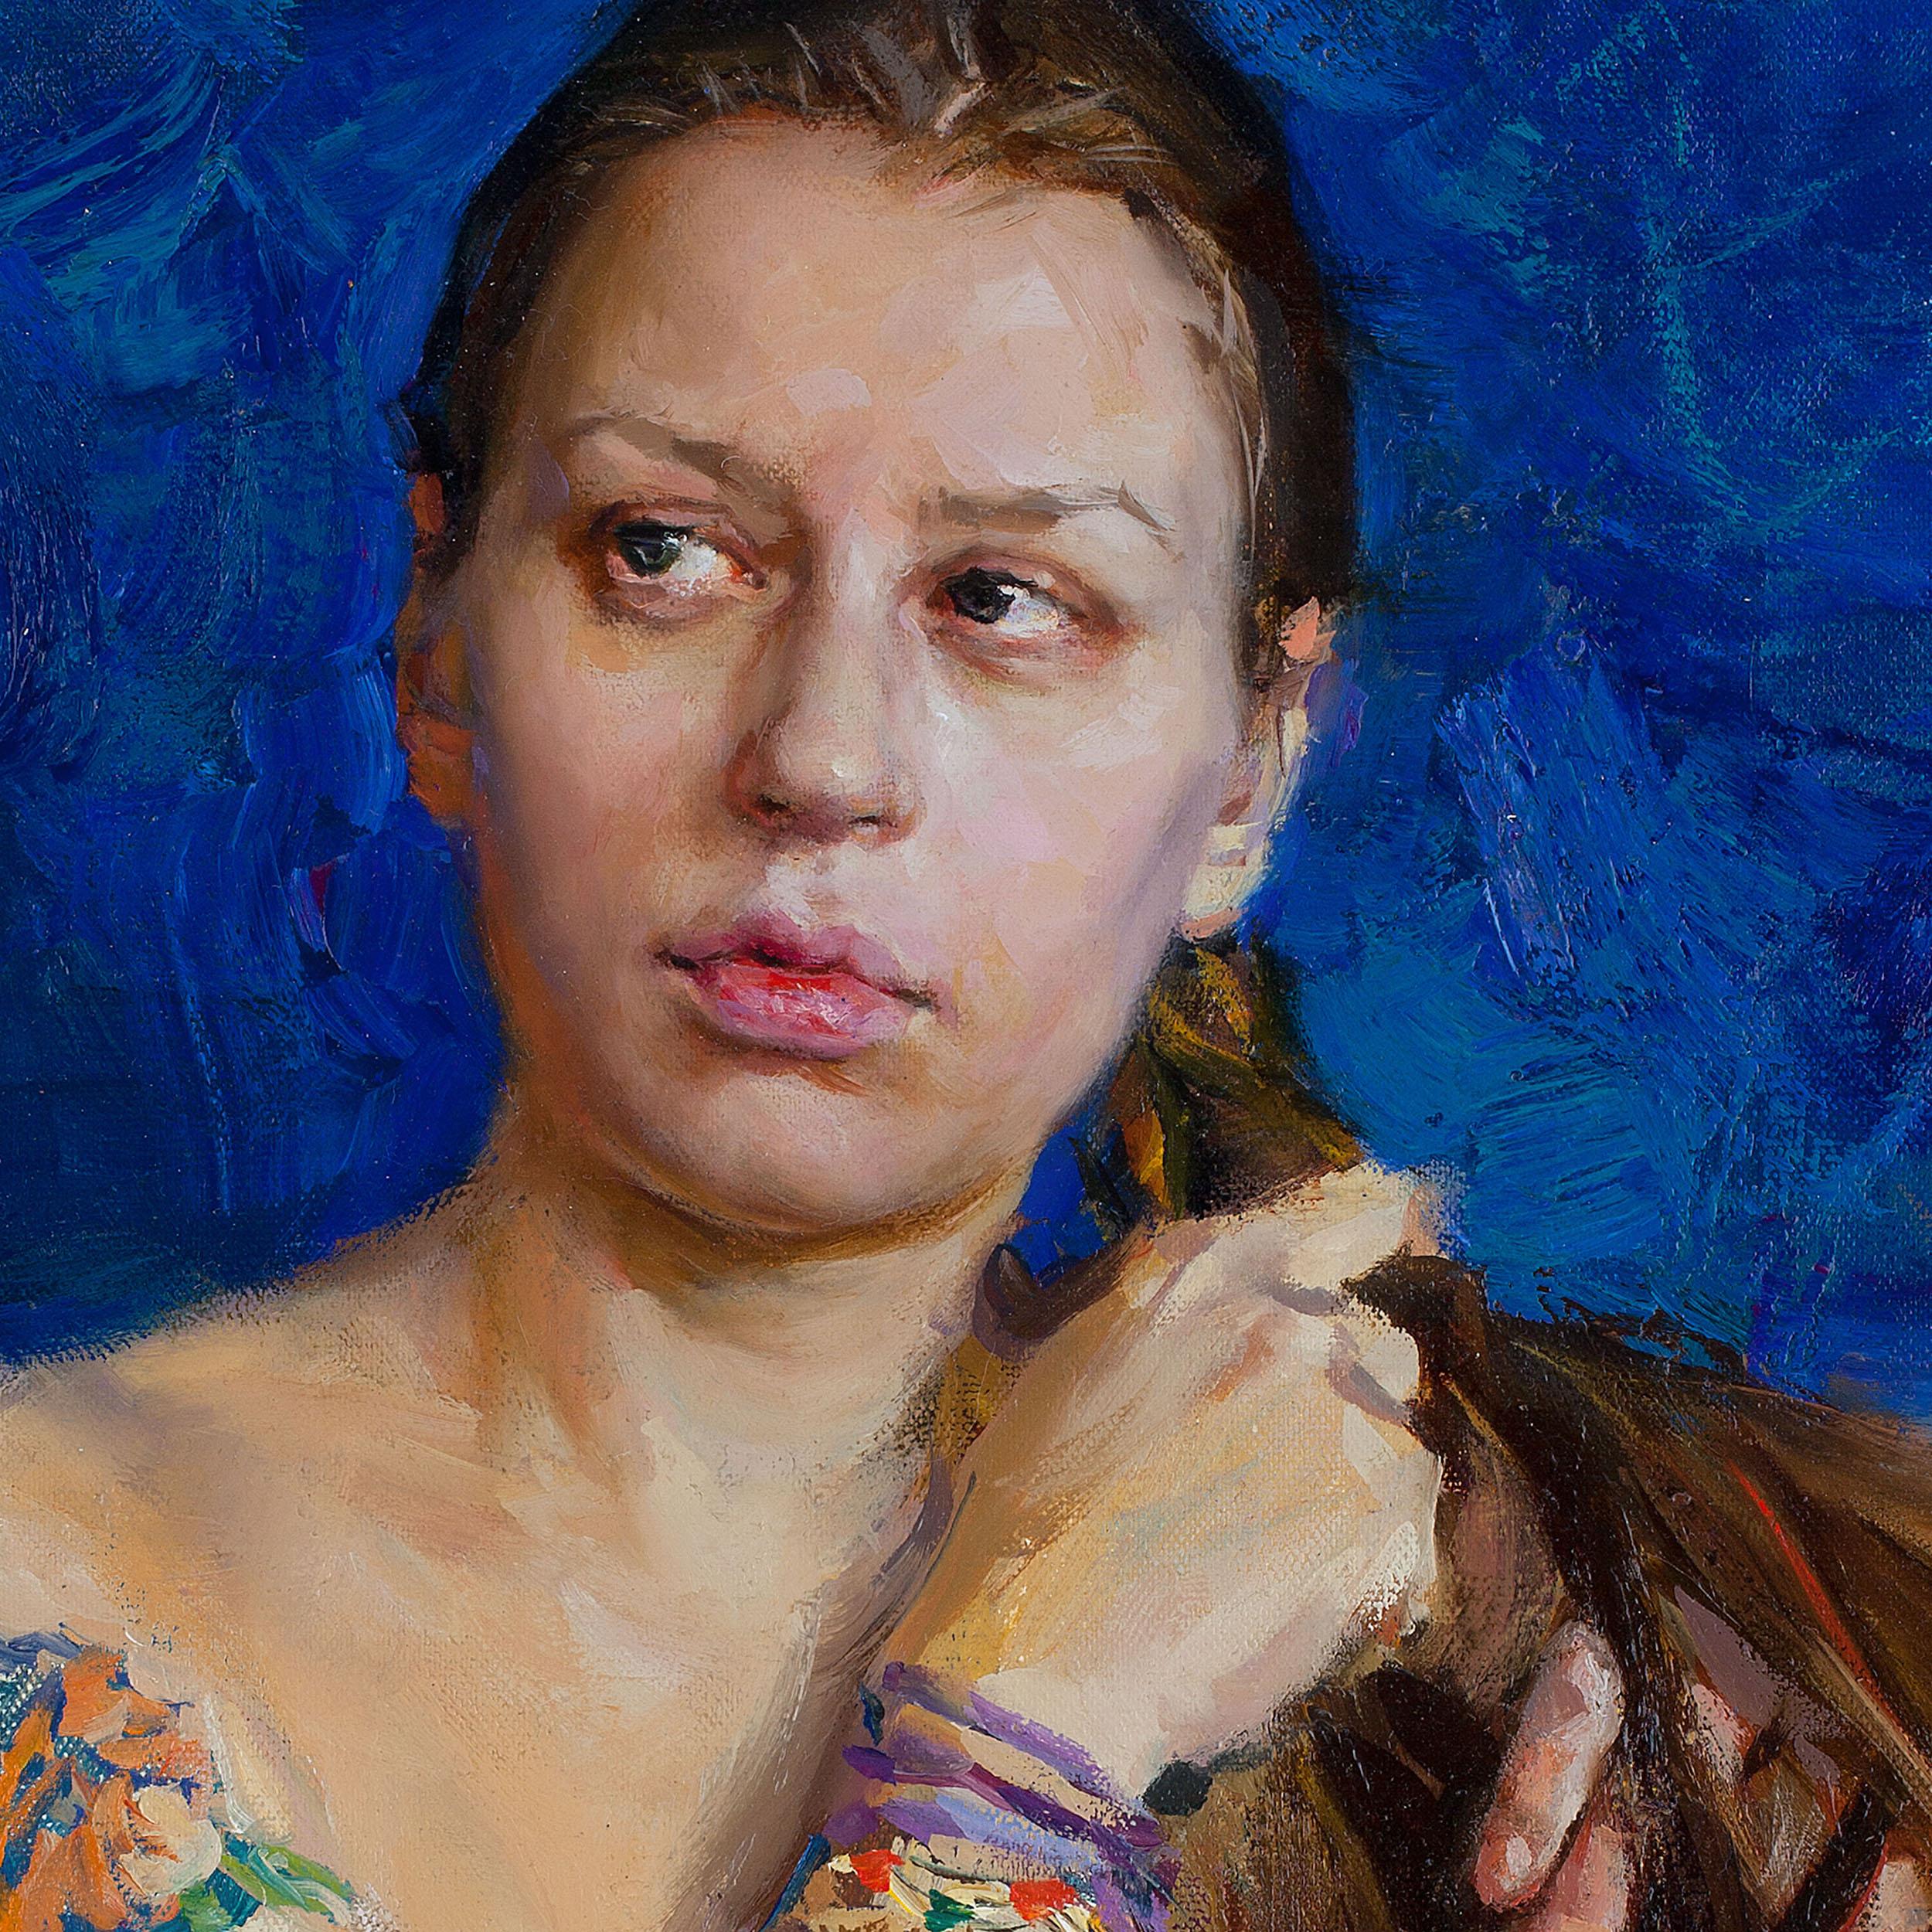 Girl with the Chimera Tattoo - Painting by Evgeniy Monahov